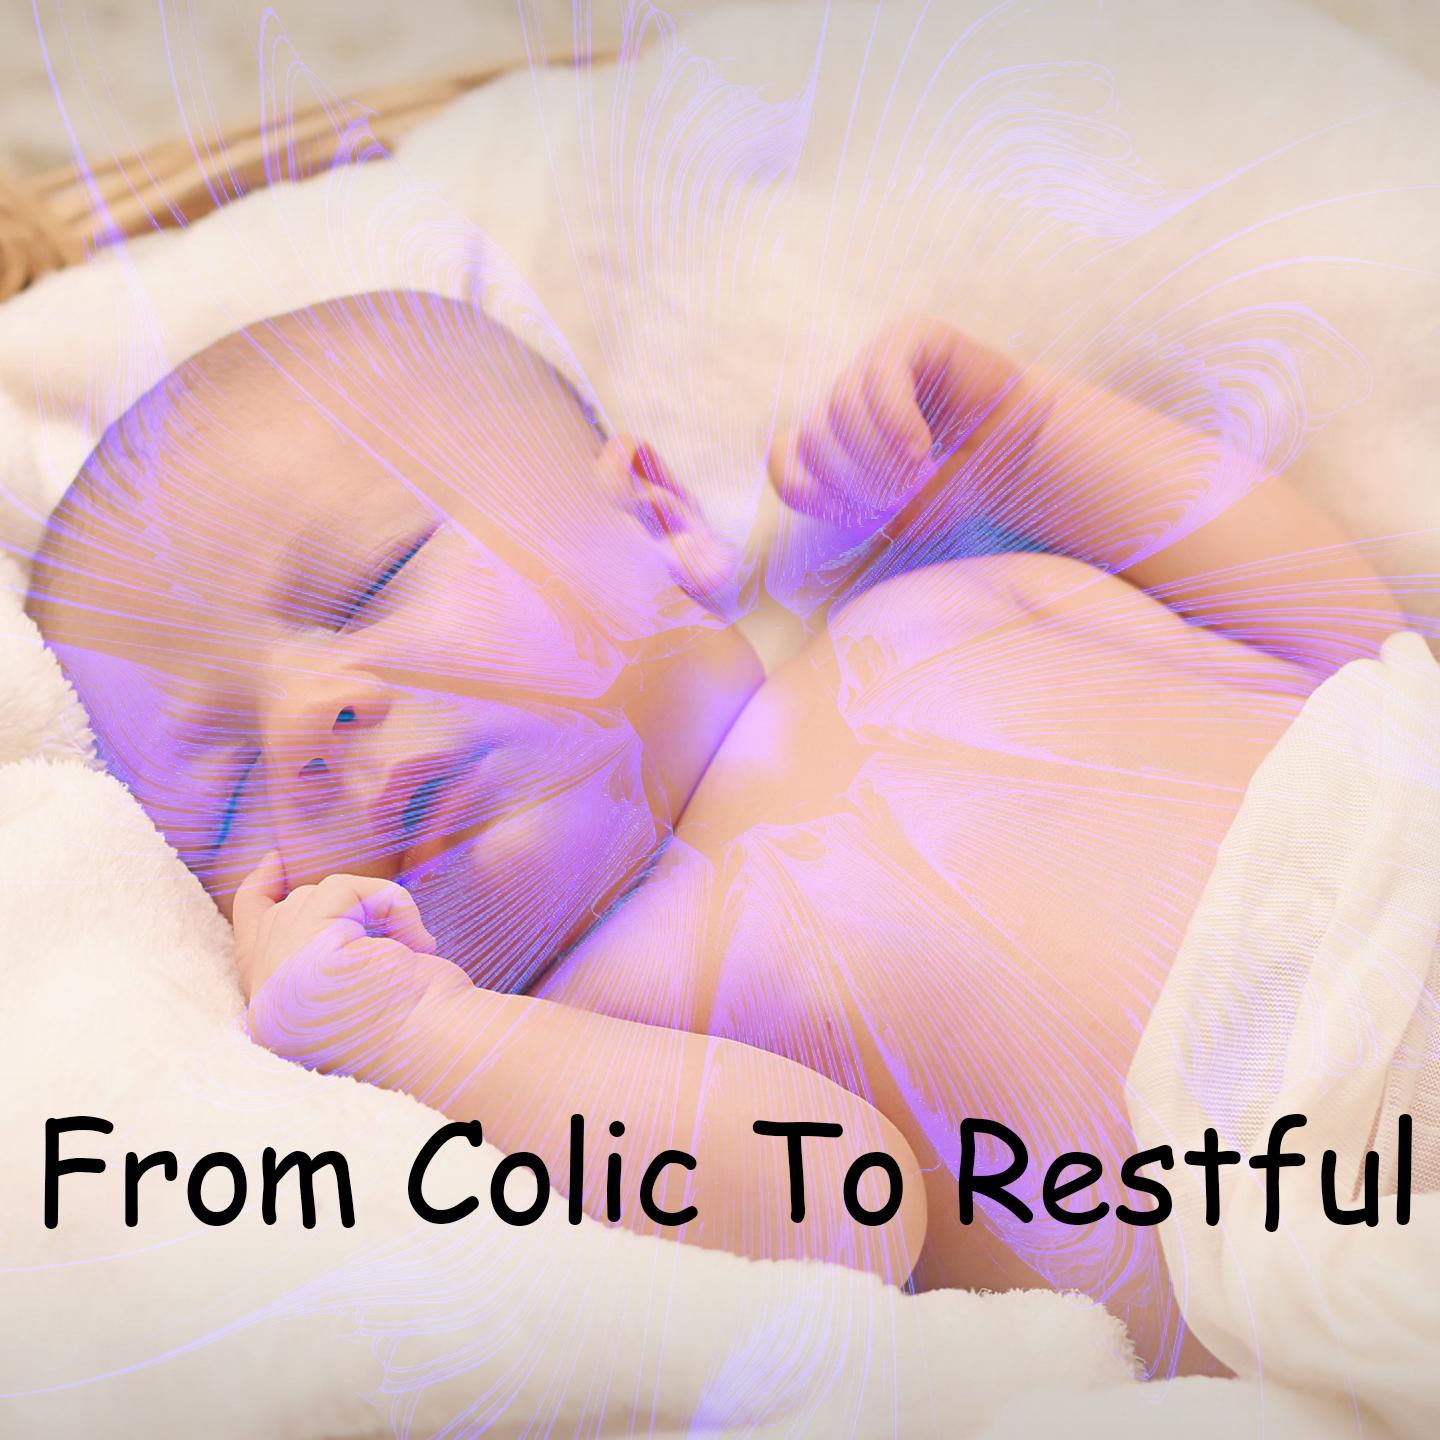 From Colic To Restful